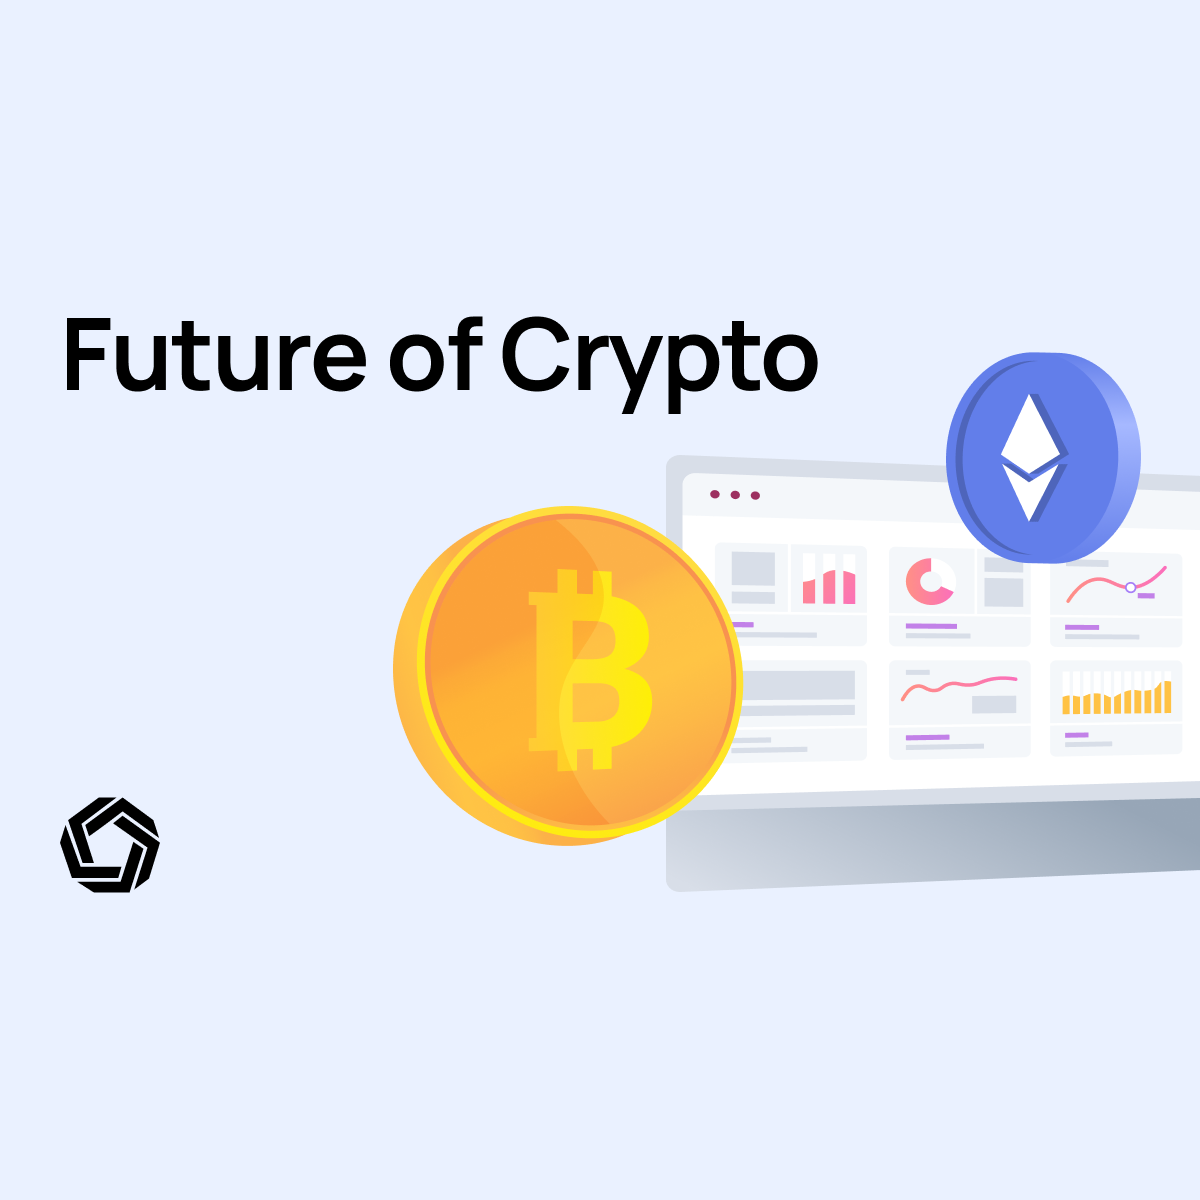 Future of Crypto in the Next 5 Years